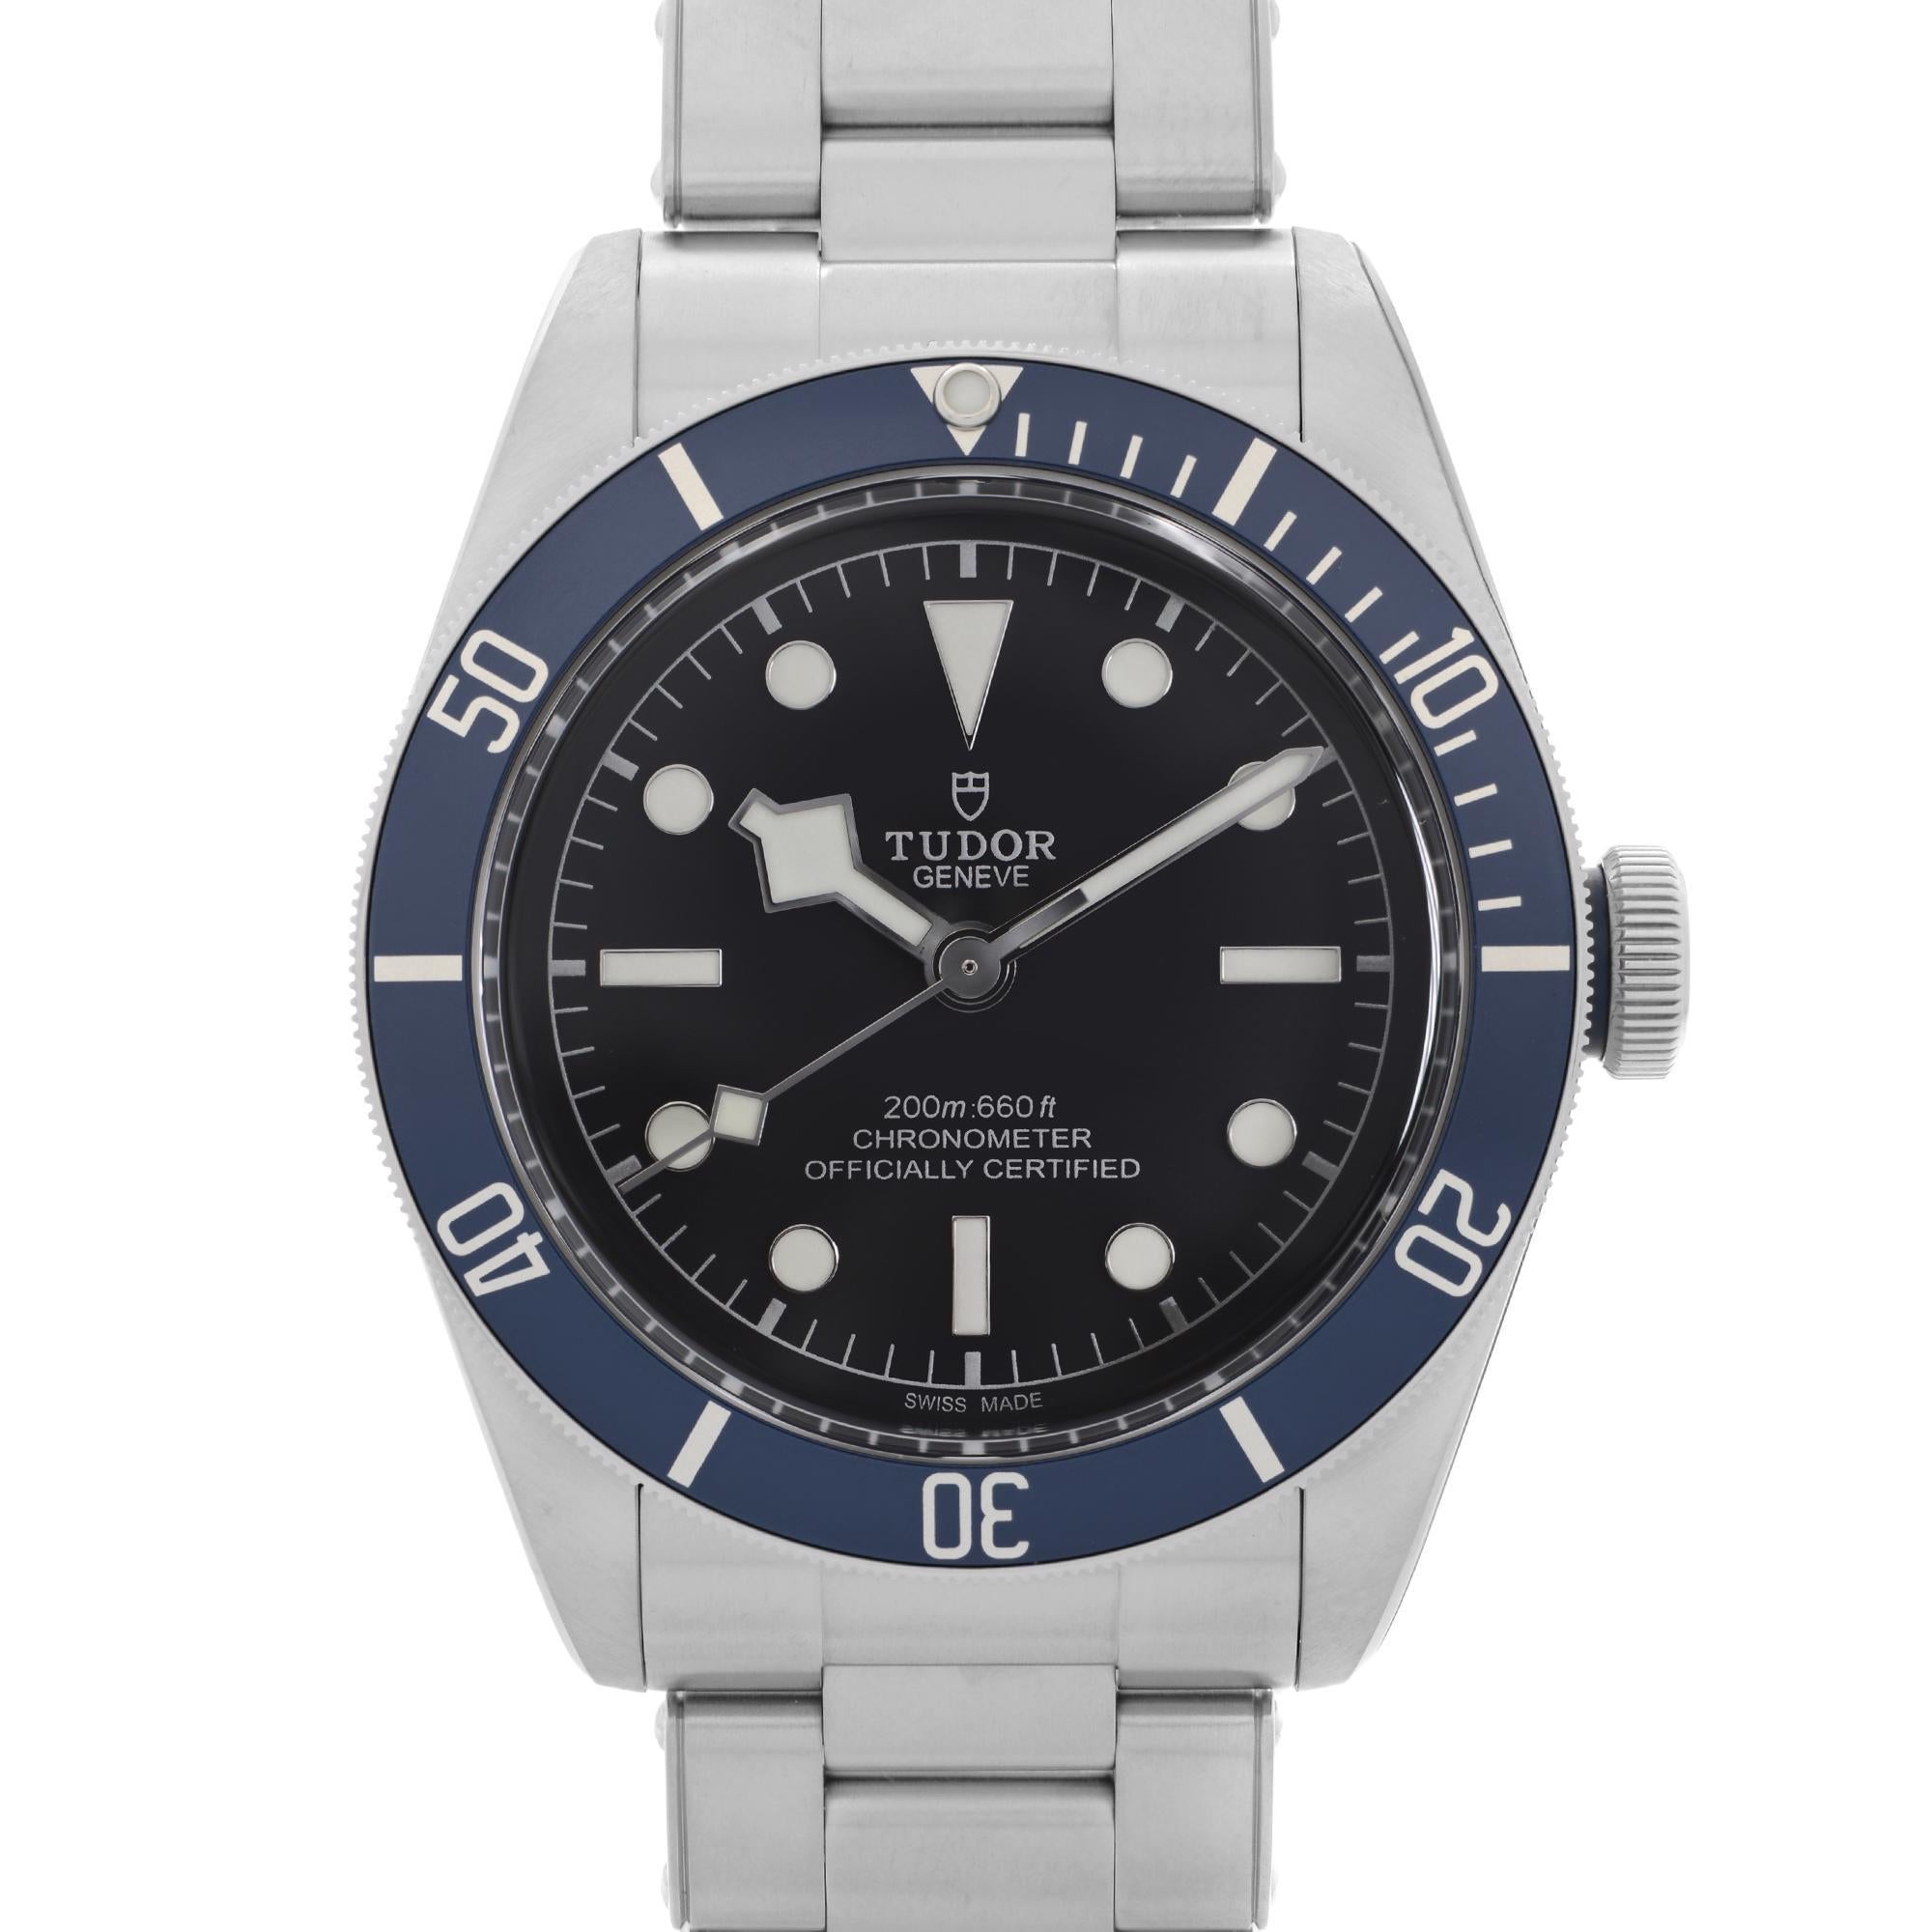 Unworn Tudor Heritage Black Bay Steel Black Dial Automatic Mens Watch 79230B-0008. Card 2021. Original Box and Papers are Included. This Beautiful Men's Timepiece is Powered By a Mechanical (Automatic) Movement and Features: Stainless Steel Case and